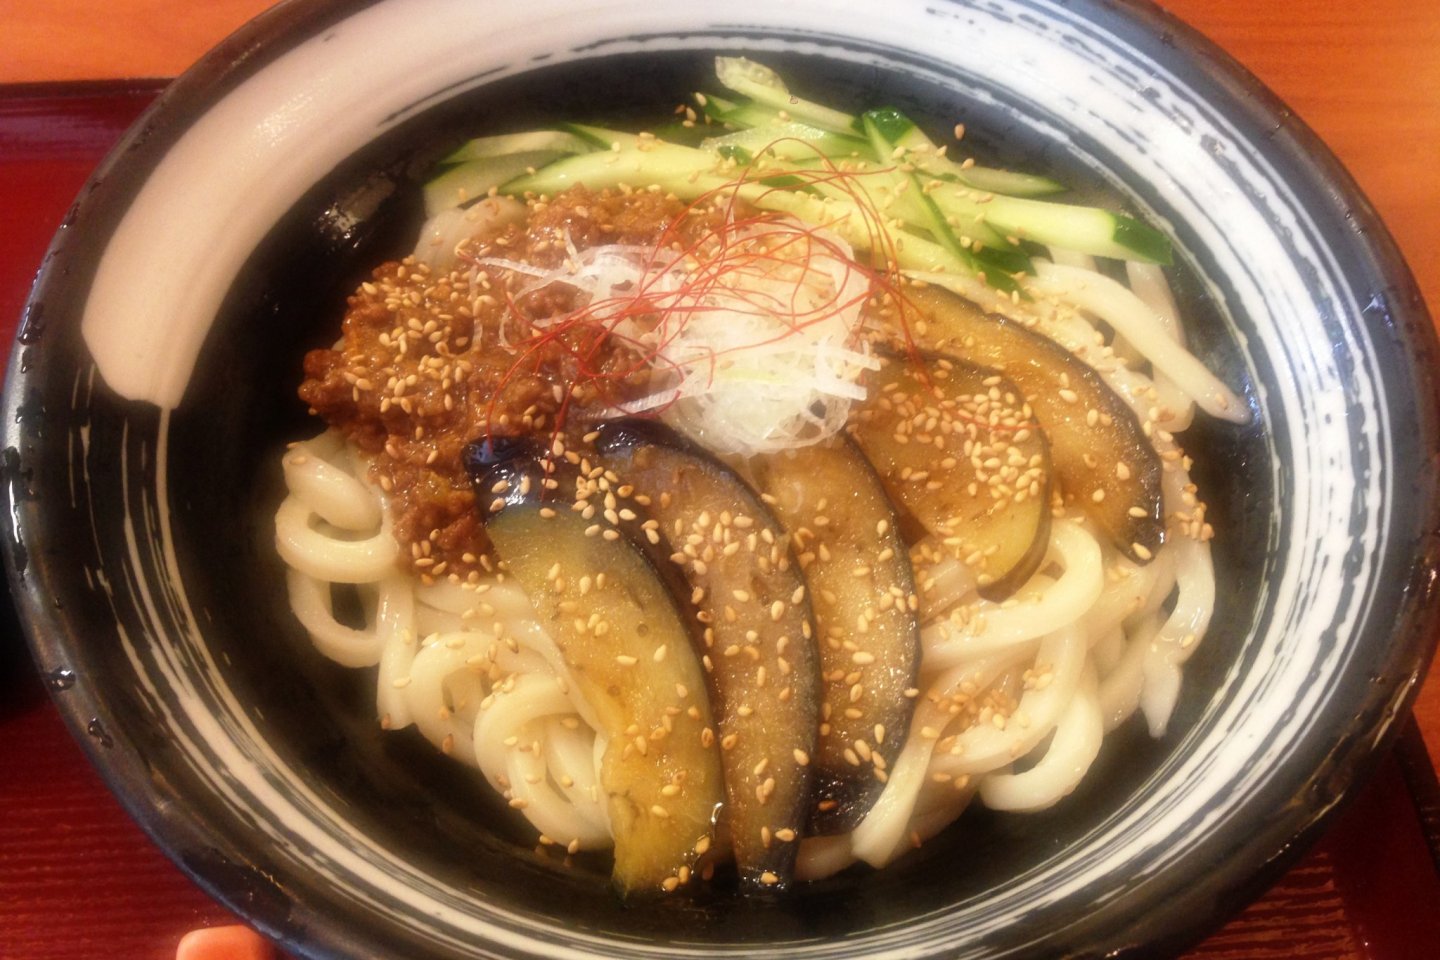 Kineya celebrates the cuisine of western and southern Japan, such as handmade Sanuki Udon noodles, as well as noodles with Kishu plum and leeks.